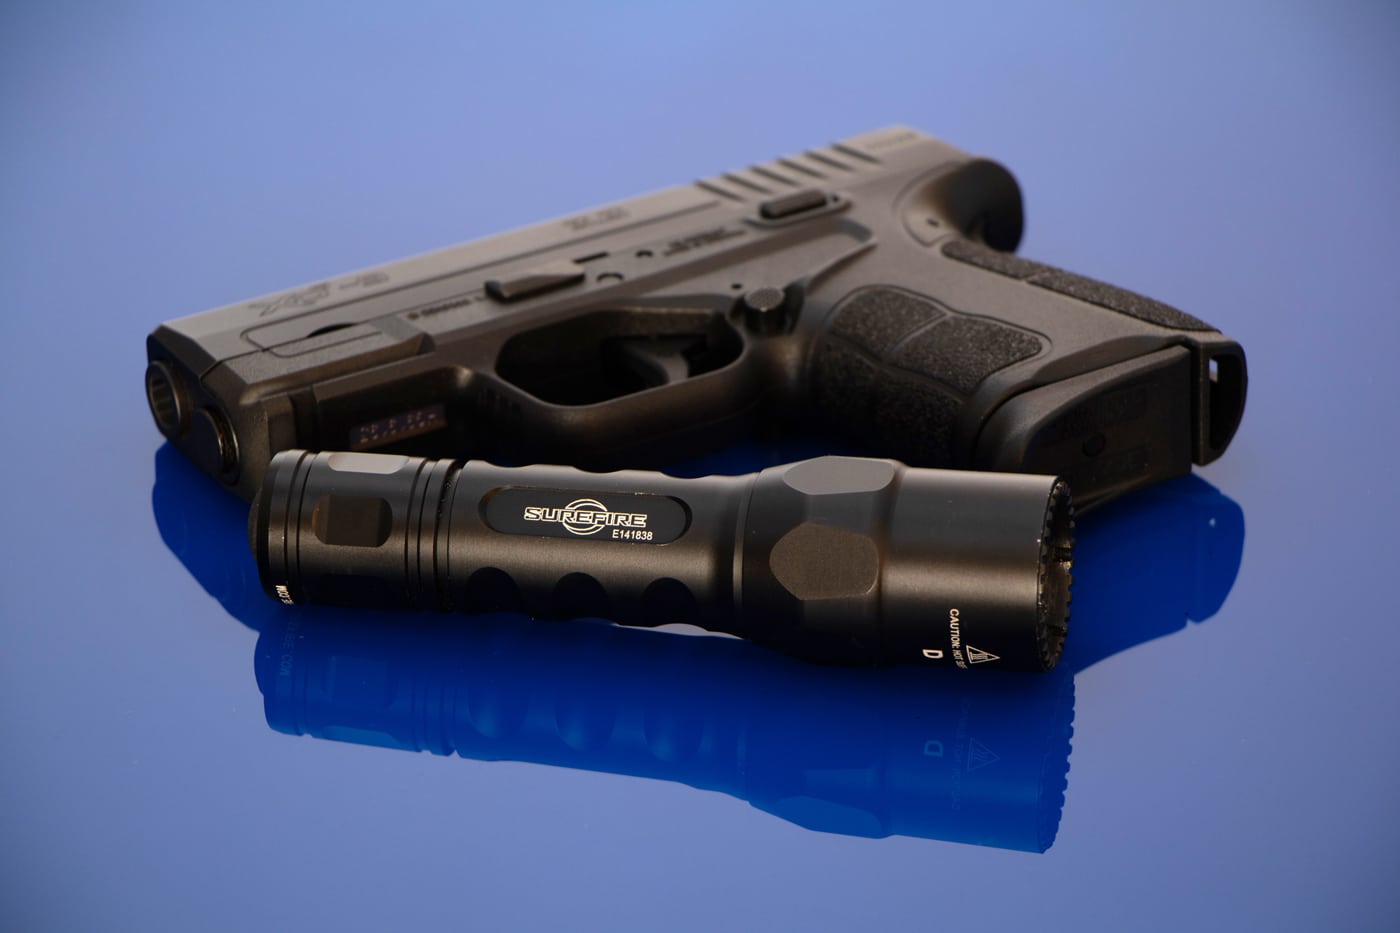 surefire tactical flashlight with xd-s for ccw self defense